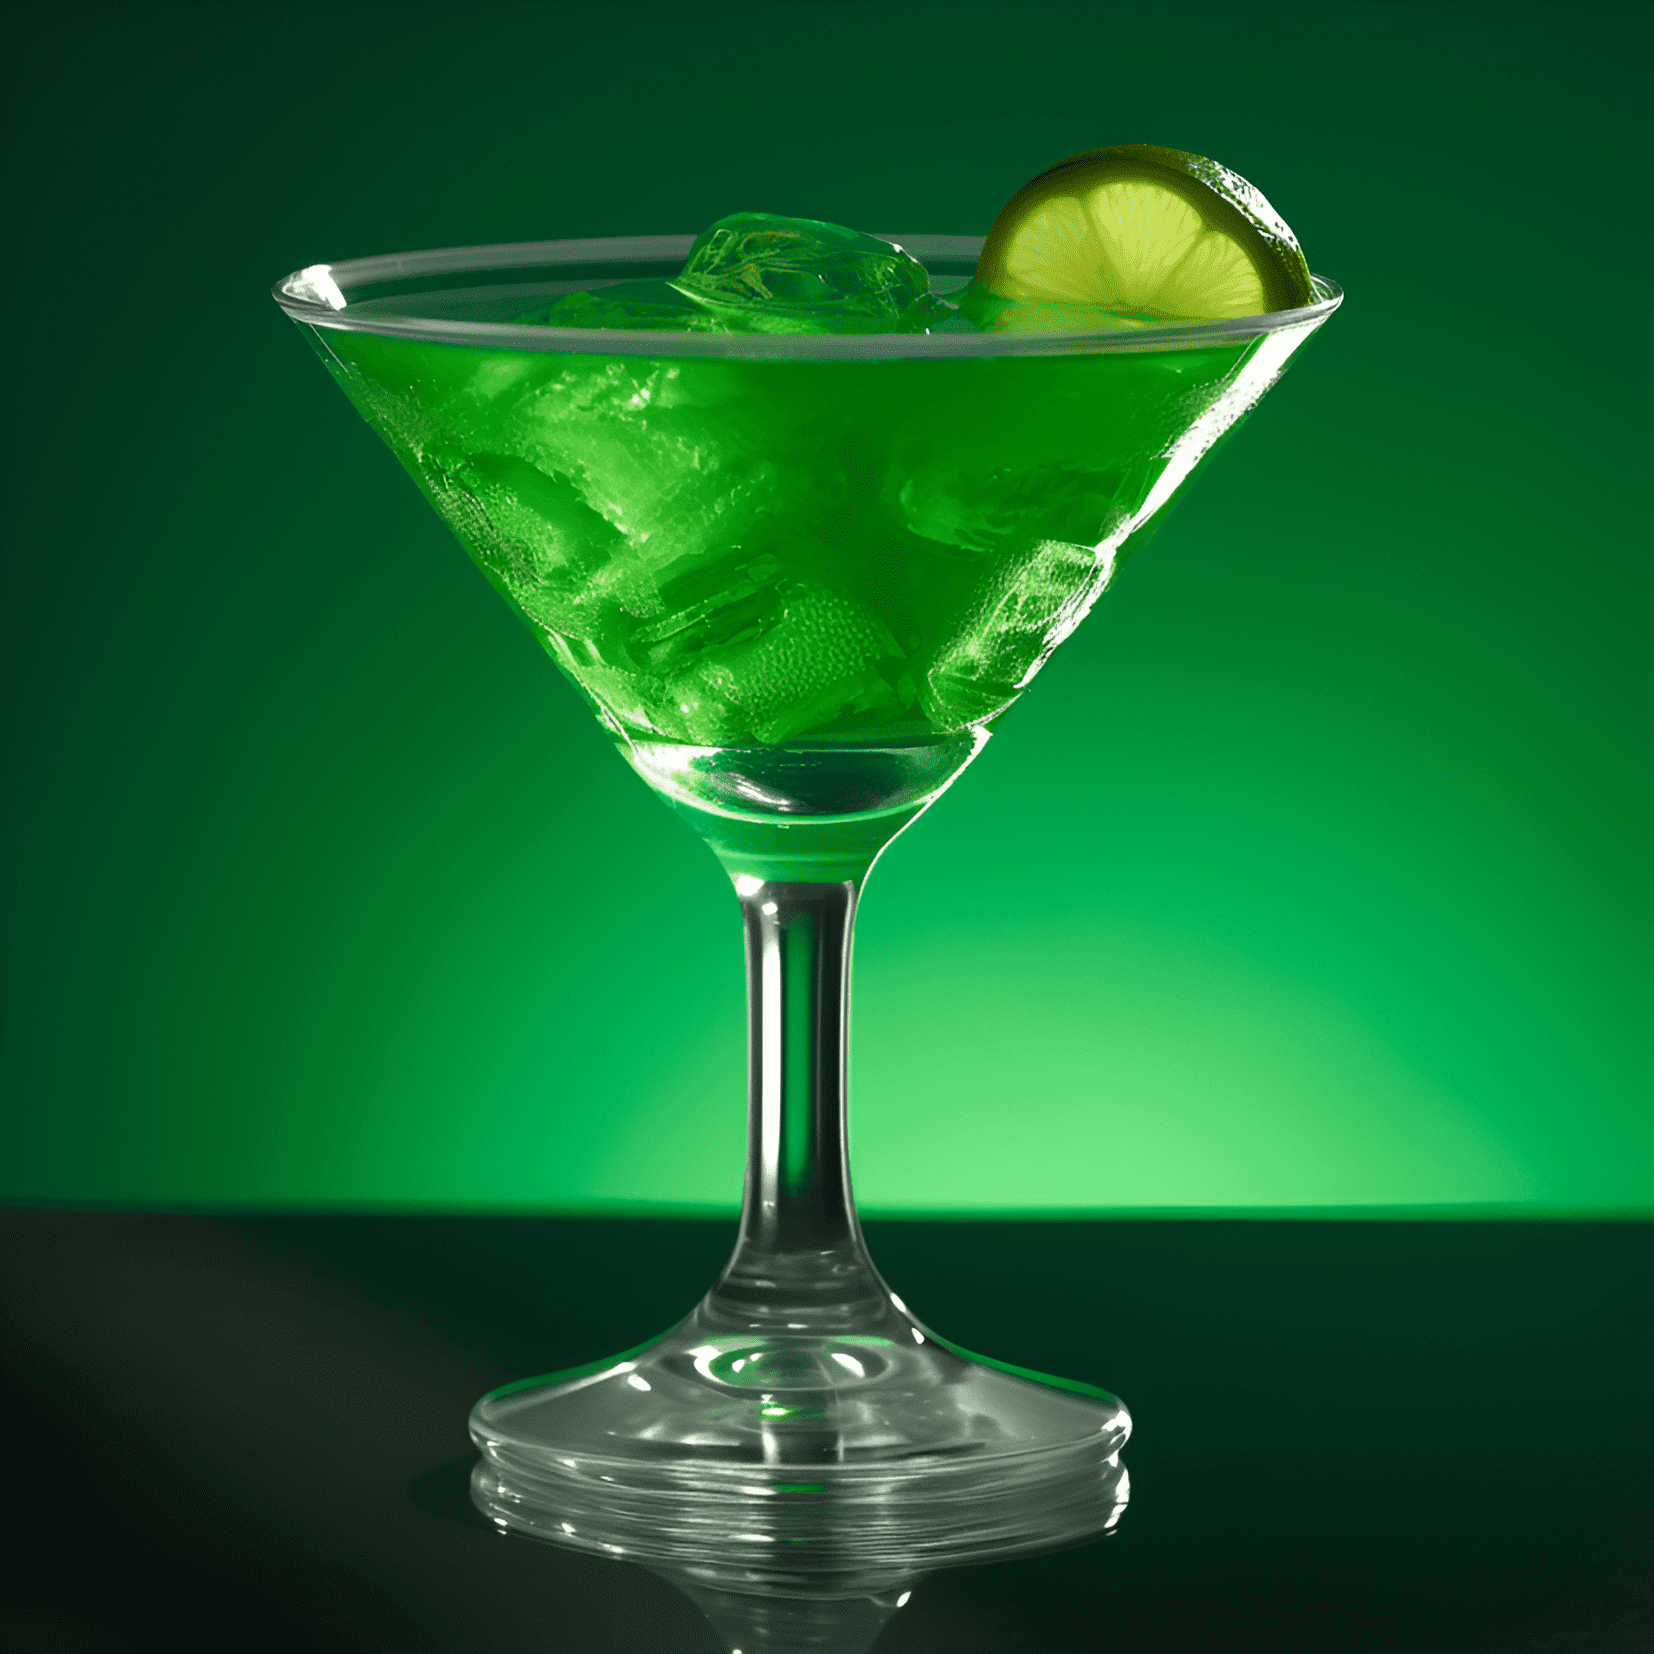 Green Hornet Cocktail Recipe - The Green Hornet cocktail is a refreshing, sweet, and slightly sour drink with a hint of mint. It has a vibrant green color and a smooth, velvety texture.